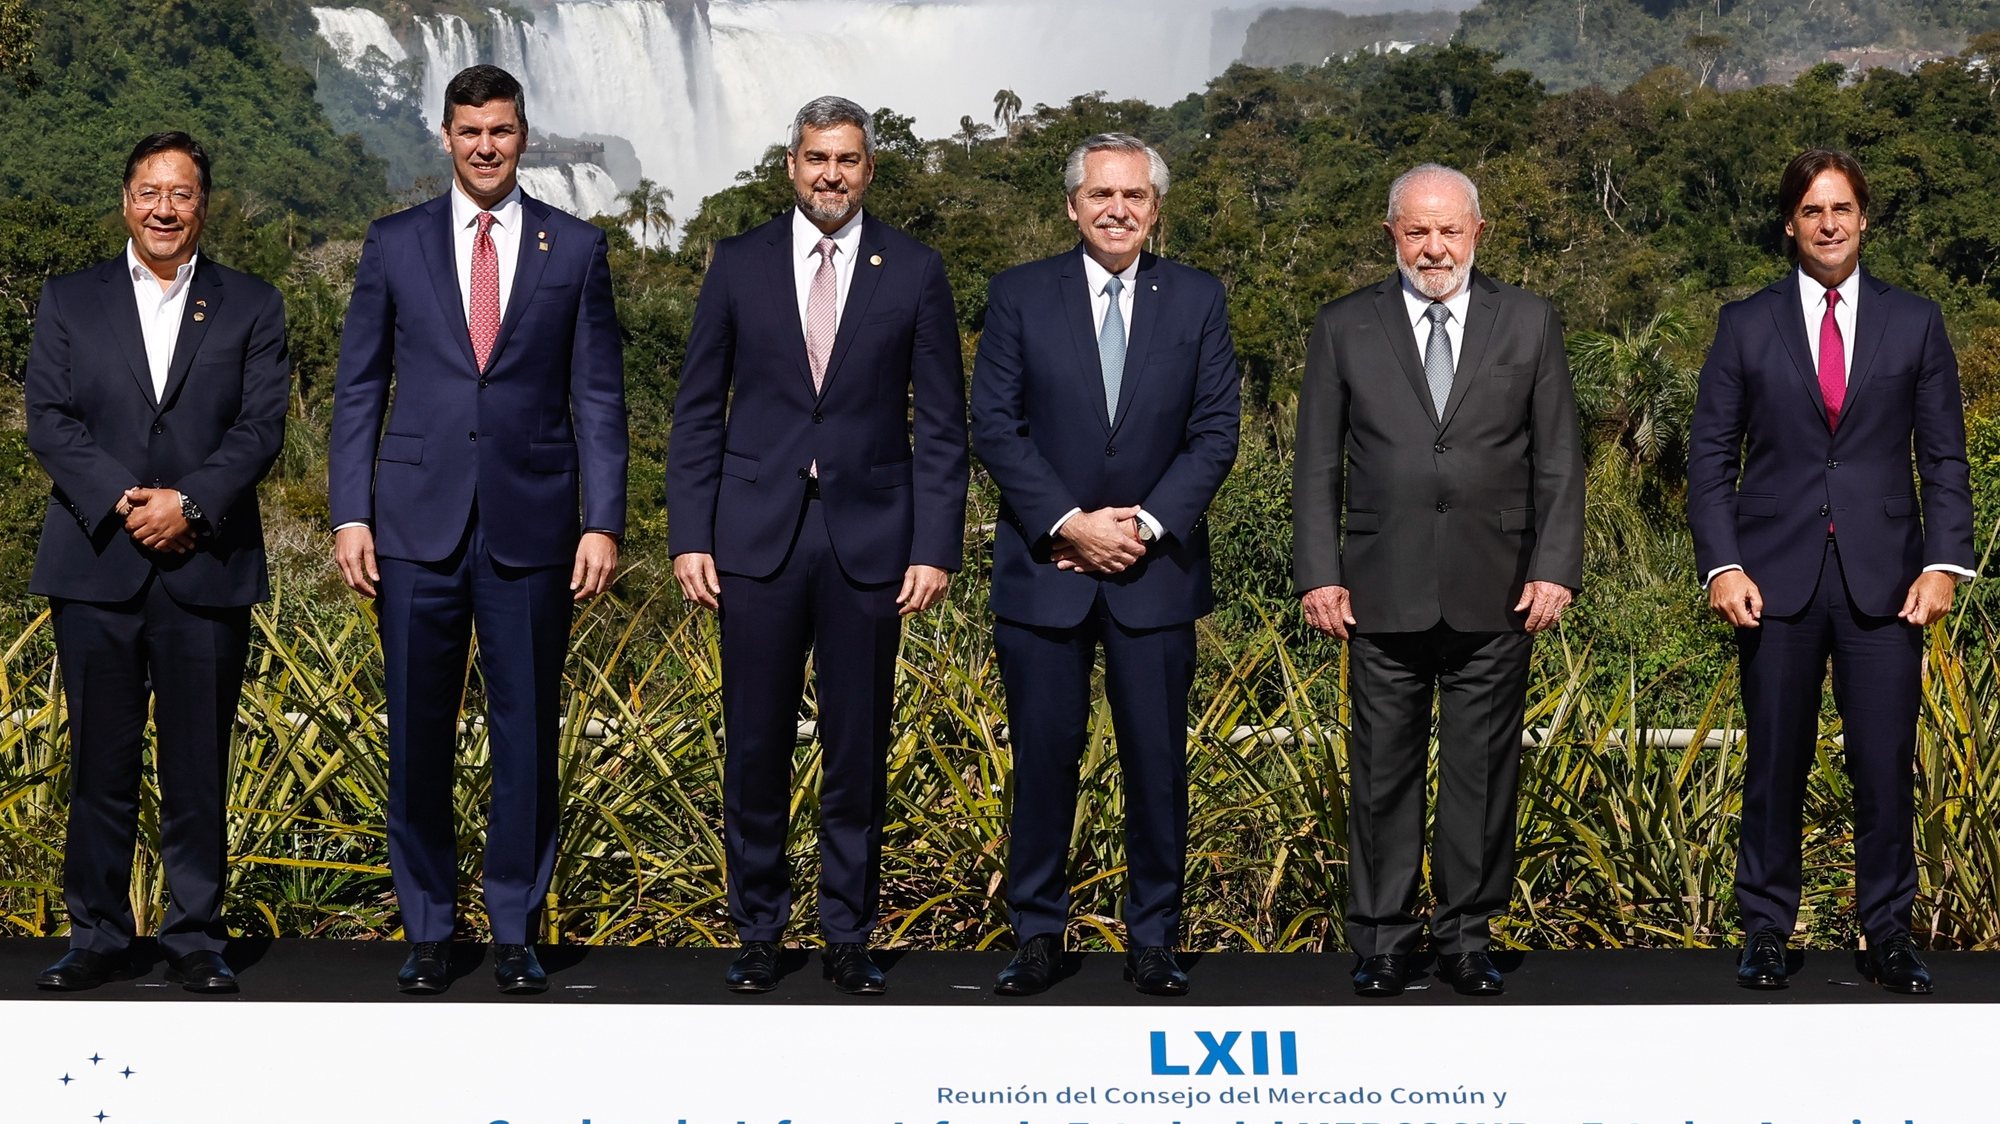 epa10726535 (L-R) The presidents Luis Arce of Bolivia, Santiago Pena president-elect of Paraguay, Mario Abdo Benitez president of Paraguay, Alberto Fernandez of Argentina, Luis Inacio Lula da Silva of Brazil, and Luis Lacalle Pou of Uruguay pose for a family photo during the Mercosur summit, in Puerto Iguazu, Argentina, 04 July 2023. Lula da Silva received the pro tempore presidency of Mercosur on 04 July from his Argentine counterpart Alberto Fernandez, who says goodbye to the bloc&#039;s summits, since he is not running for re-election. Fernandez handed over the Mercosur baton, which is also made up of Paraguay and Uruguay, to the progressive leader and closed the LXII Summit of Heads of State of the South American group, which was held in a luxurious hotel in Puerto Iguazu.  EPA/JUAN IGNACIO RONCORONI